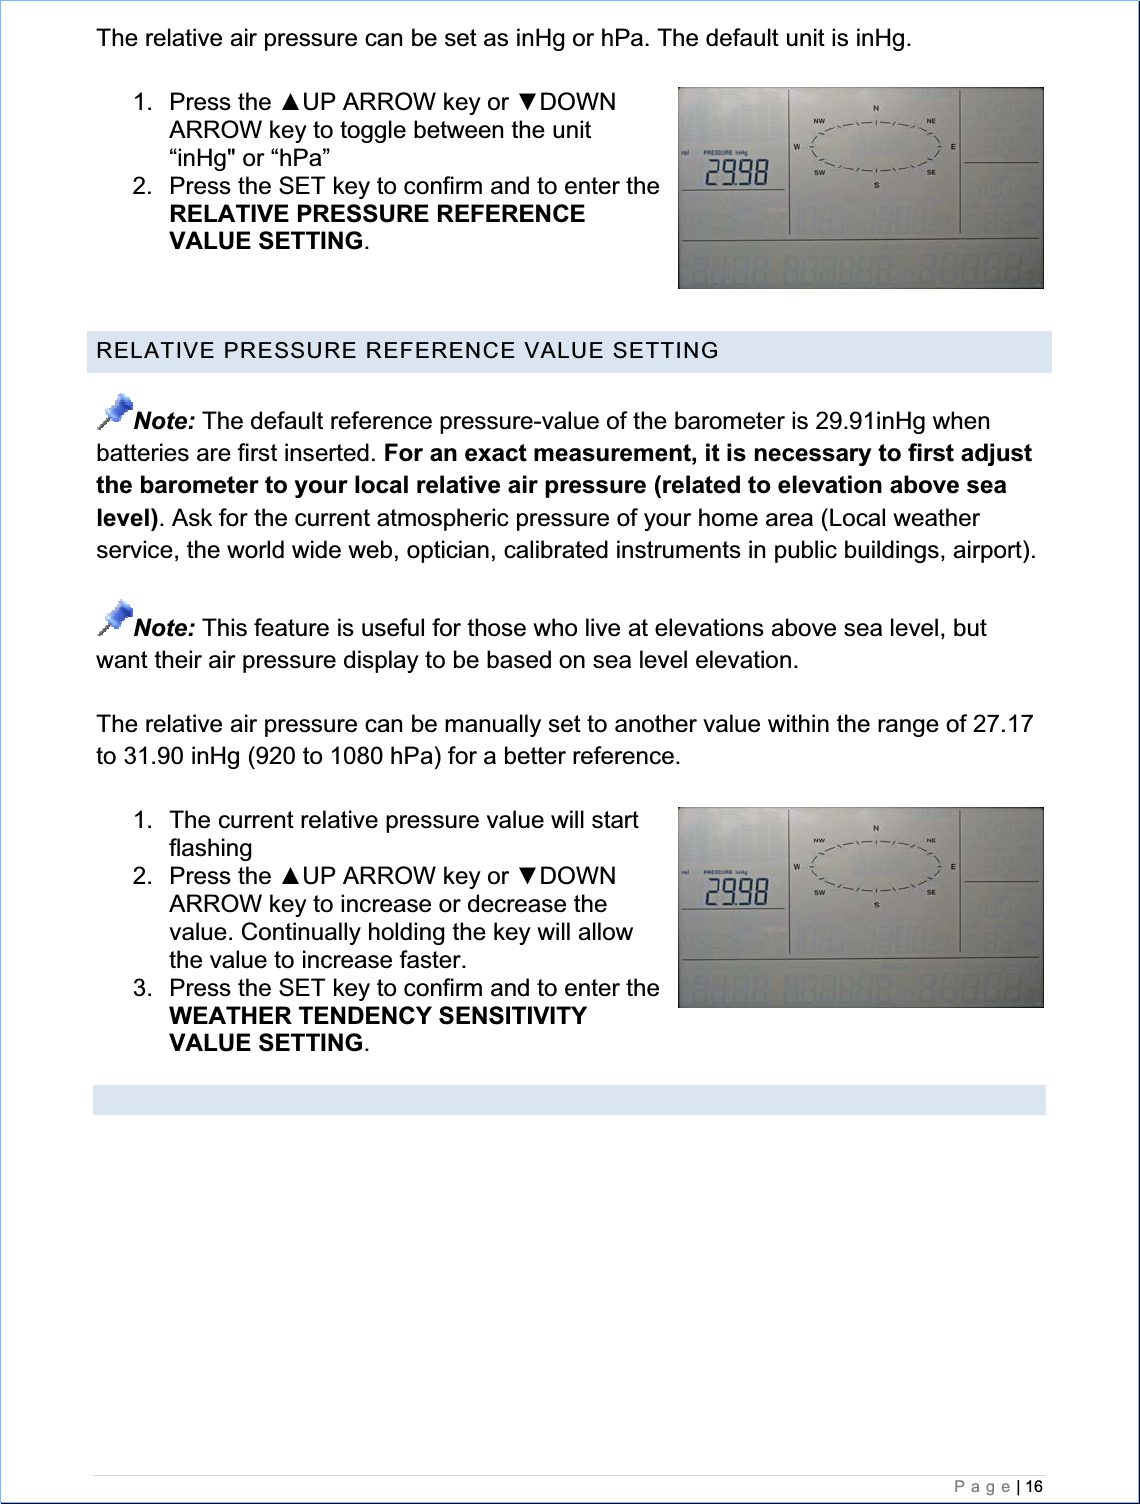    Page| 16  The relative air pressure can be set as inHg or hPa. The default unit is inHg. 1. Press the ŸUP ARROW key or źDOWN ARROW key to toggle between the unit “inHg&quot; or “hPa” 2.  Press the SET key to confirm and to enter theRELATIVE PRESSURE REFERENCE VALUE SETTING.RELATIVE PRESSURE REFERENCE VALUE SETTING Note: The default reference pressure-value of the barometer is 29.91inHg when batteries are first inserted. For an exact measurement, it is necessary to first adjust the barometer to your local relative air pressure (related to elevation above sea level). Ask for the current atmospheric pressure of your home area (Local weather service, the world wide web, optician, calibrated instruments in public buildings, airport). Note: This feature is useful for those who live at elevations above sea level, but want their air pressure display to be based on sea level elevation. The relative air pressure can be manually set to another value within the range of 27.17 to 31.90 inHg (920 to 1080 hPa) for a better reference. 1.  The current relative pressure value will start flashing2. Press the ŸUP ARROW key or źDOWN ARROW key to increase or decrease the value. Continually holding the key will allow the value to increase faster. 3.  Press the SET key to confirm and to enter theWEATHER TENDENCY SENSITIVITY VALUE SETTING.